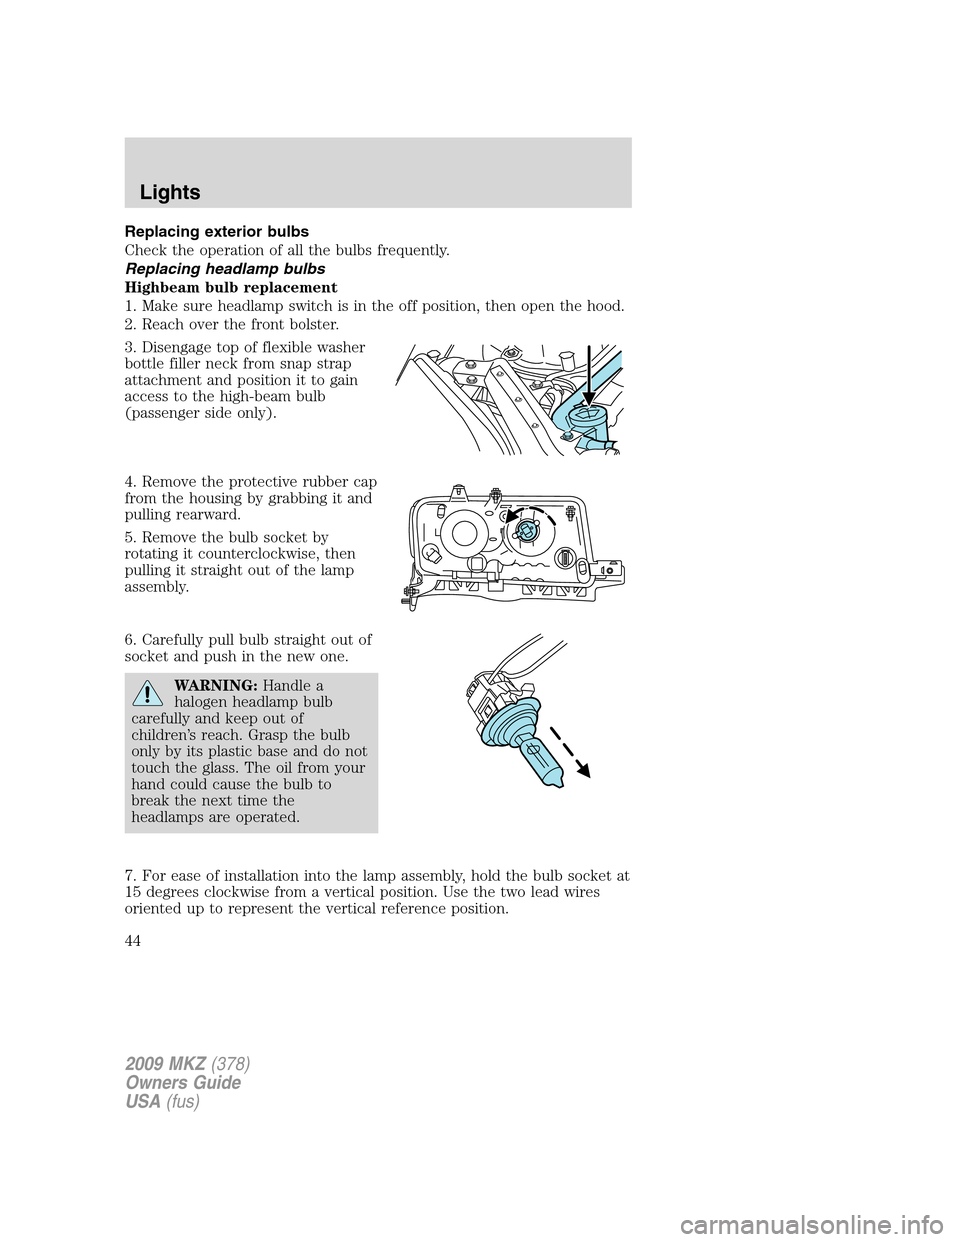 LINCOLN MKZ 2009  Owners Manual Replacing exterior bulbs
Check the operation of all the bulbs frequently.
Replacing headlamp bulbs
Highbeam bulb replacement
1. Make sure headlamp switch is in the off position, then open the hood.
2.